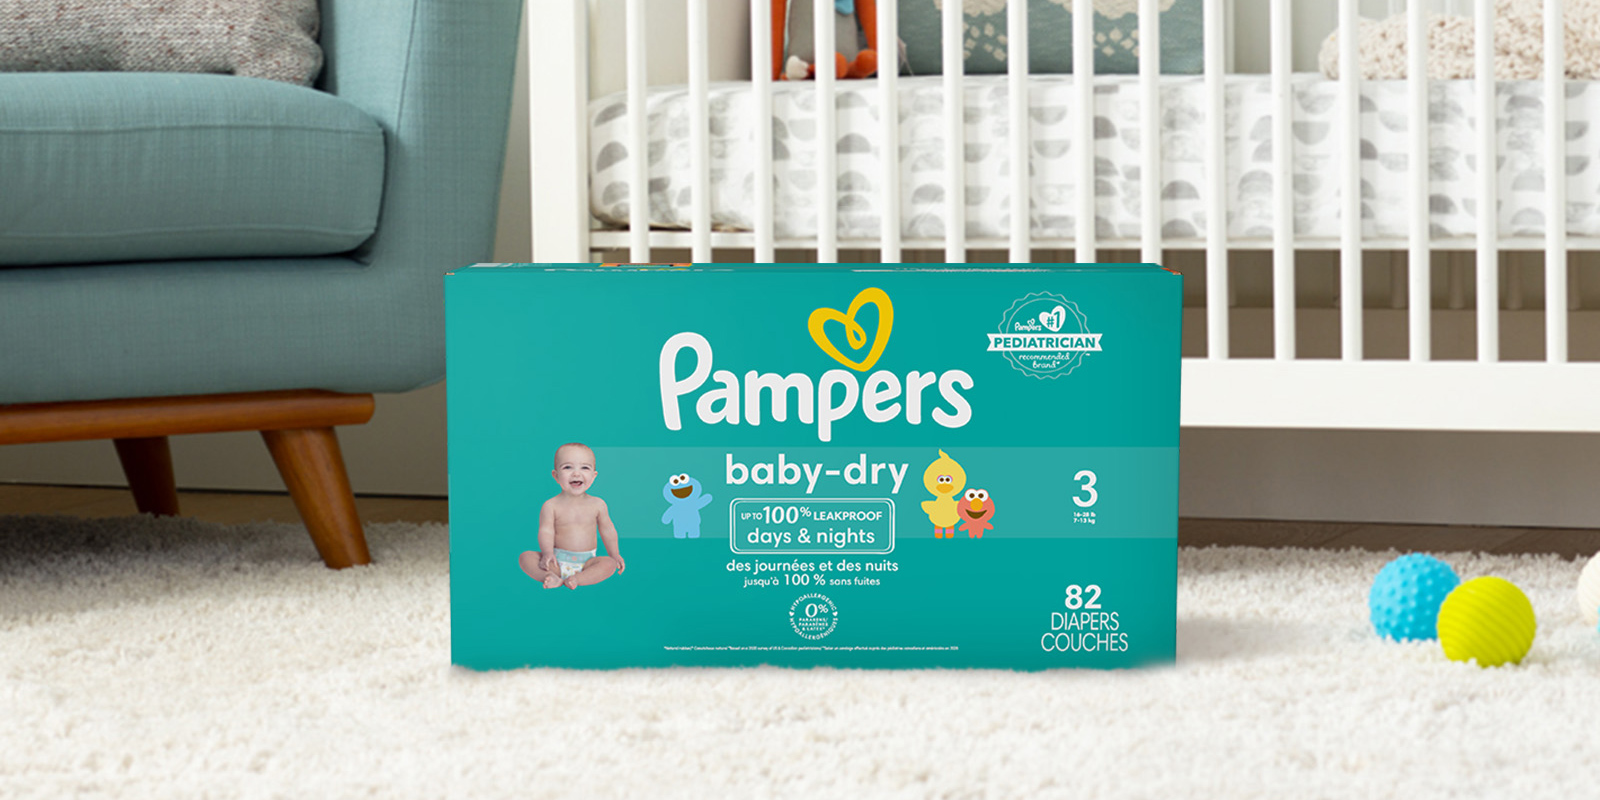 pieluchy pampers 1 lidl